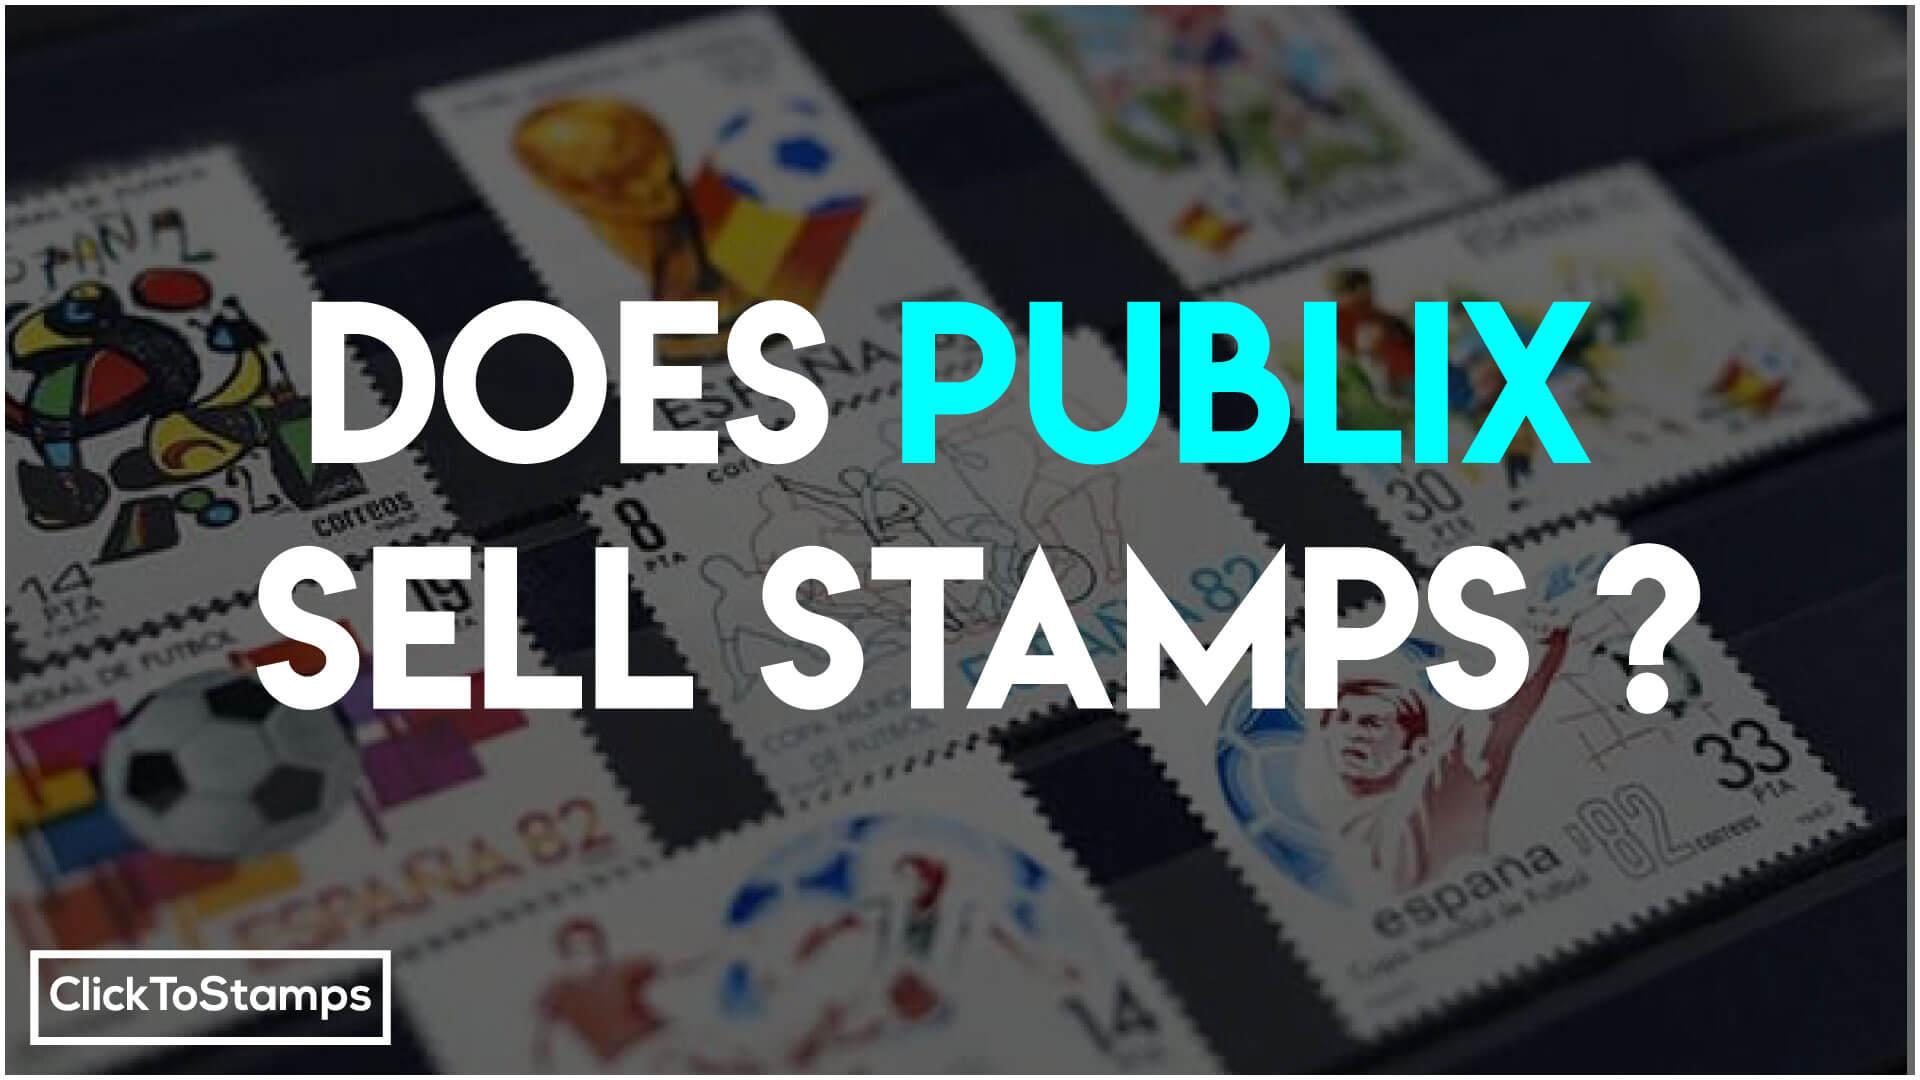 Does Publix sell stamps